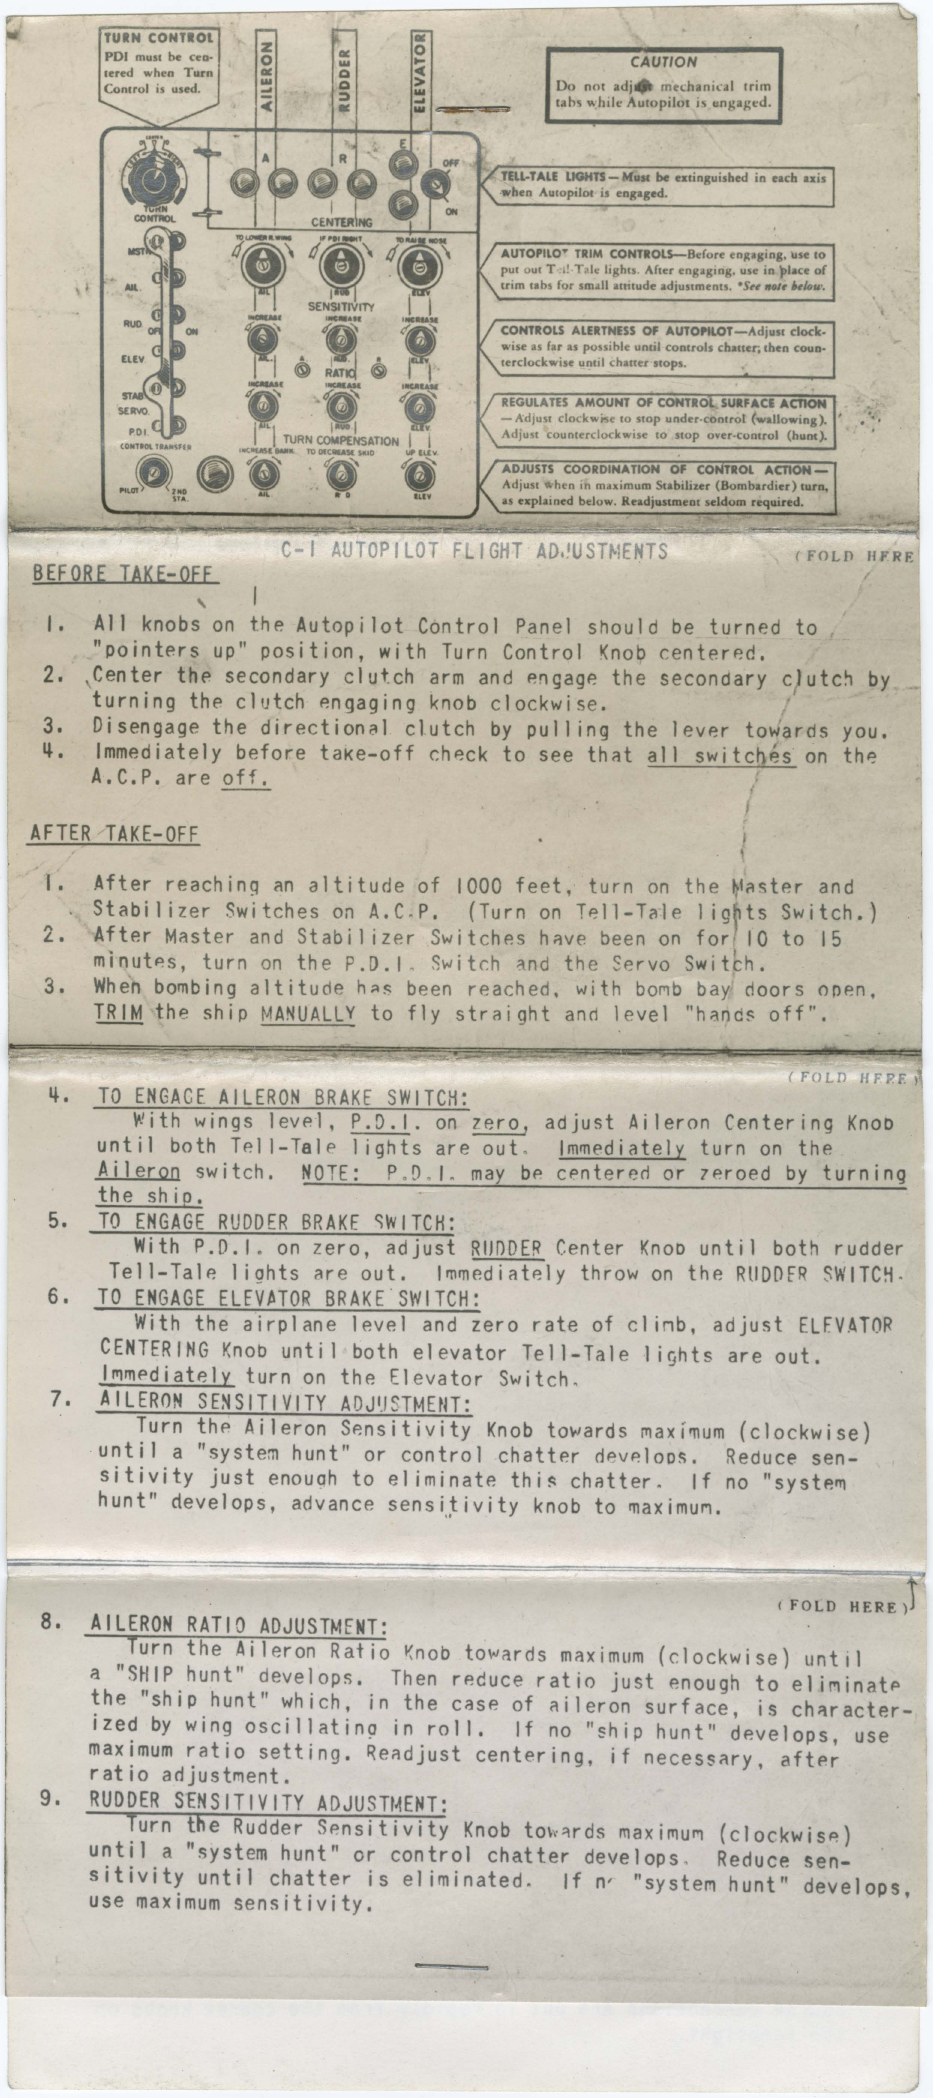 Sample page 1 from AirCorps Library document: C-1 Autopilot Flight Adjustments